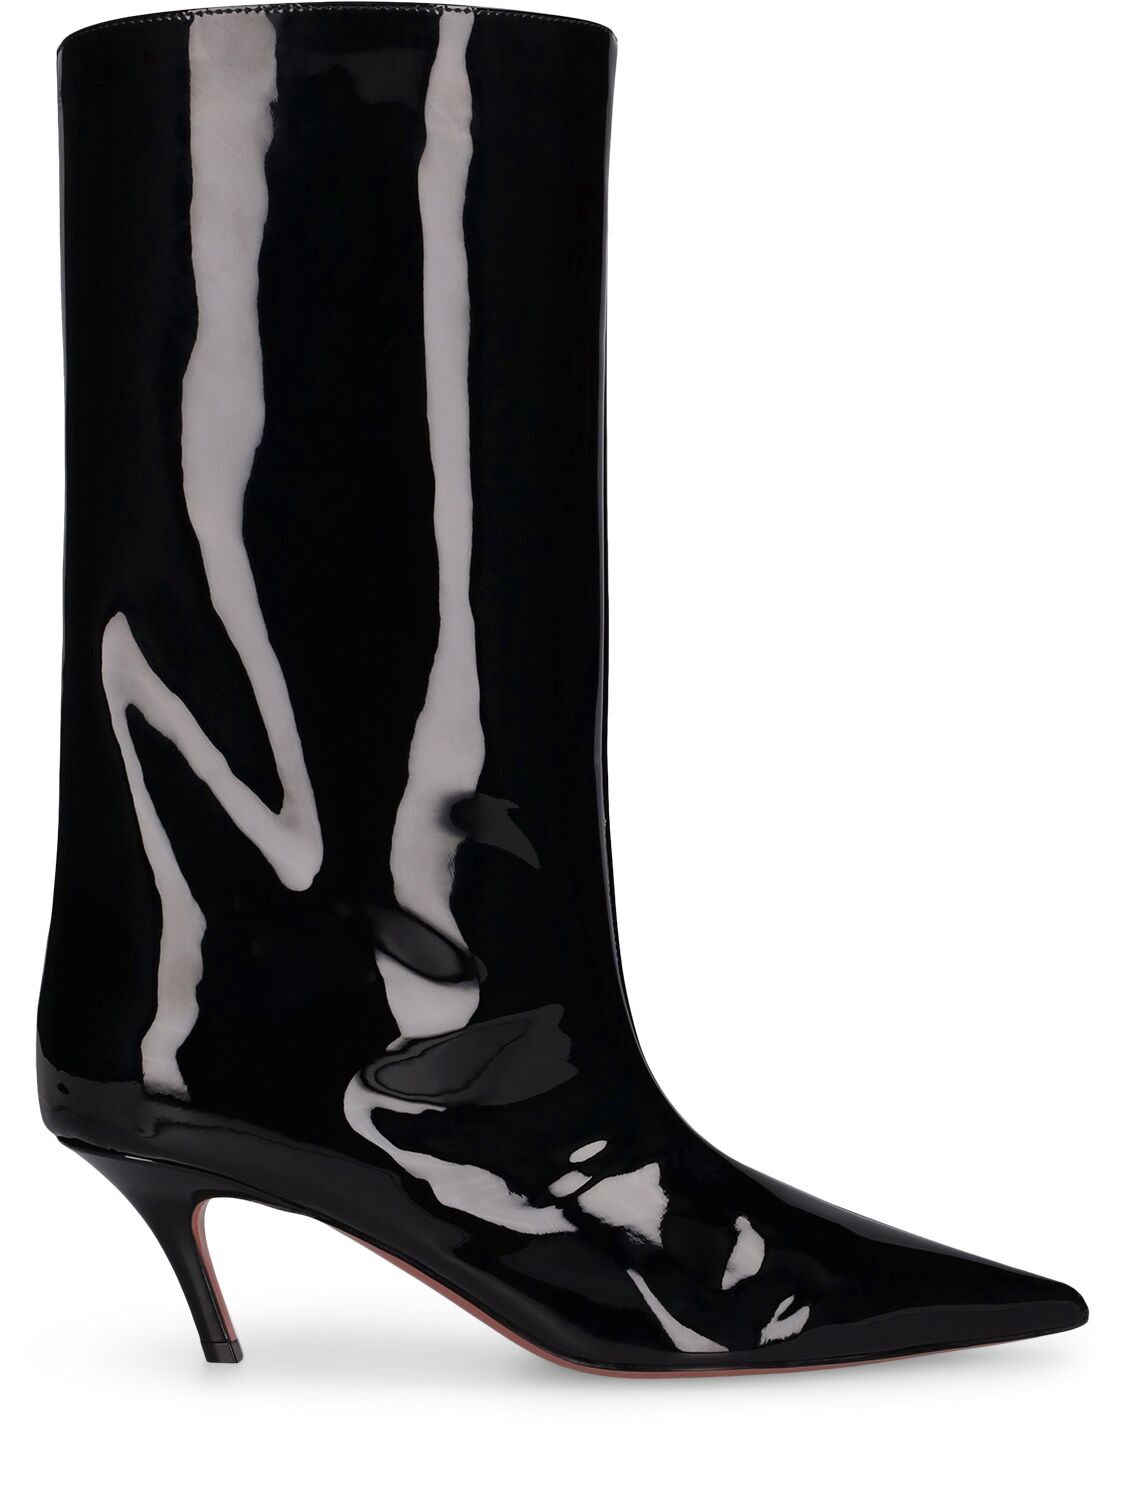 60mm Fiona Patent Leather Boots